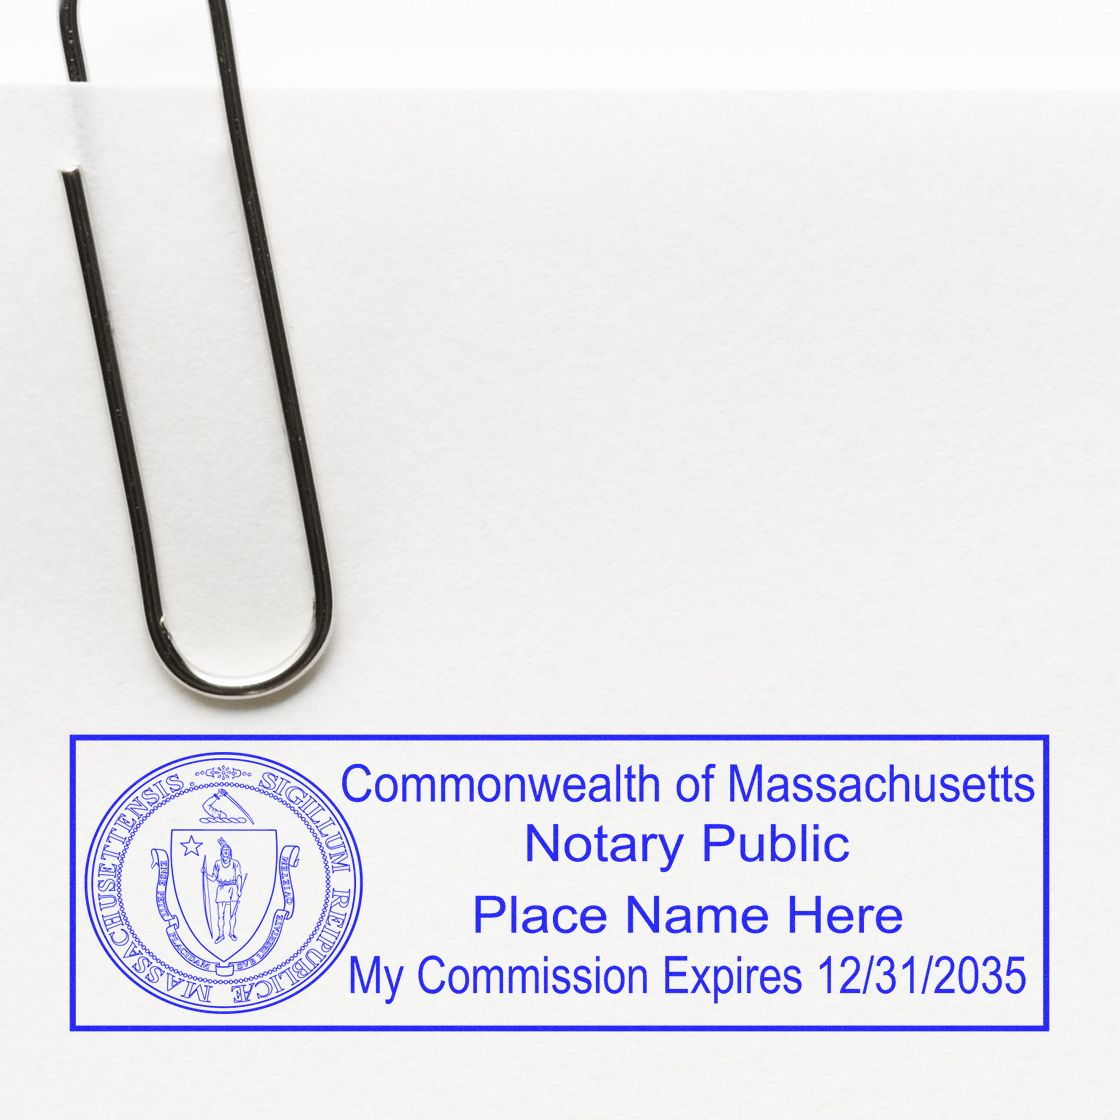 This paper is stamped with a sample imprint of the Wooden Handle Massachusetts State Seal Notary Public Stamp, signifying its quality and reliability.